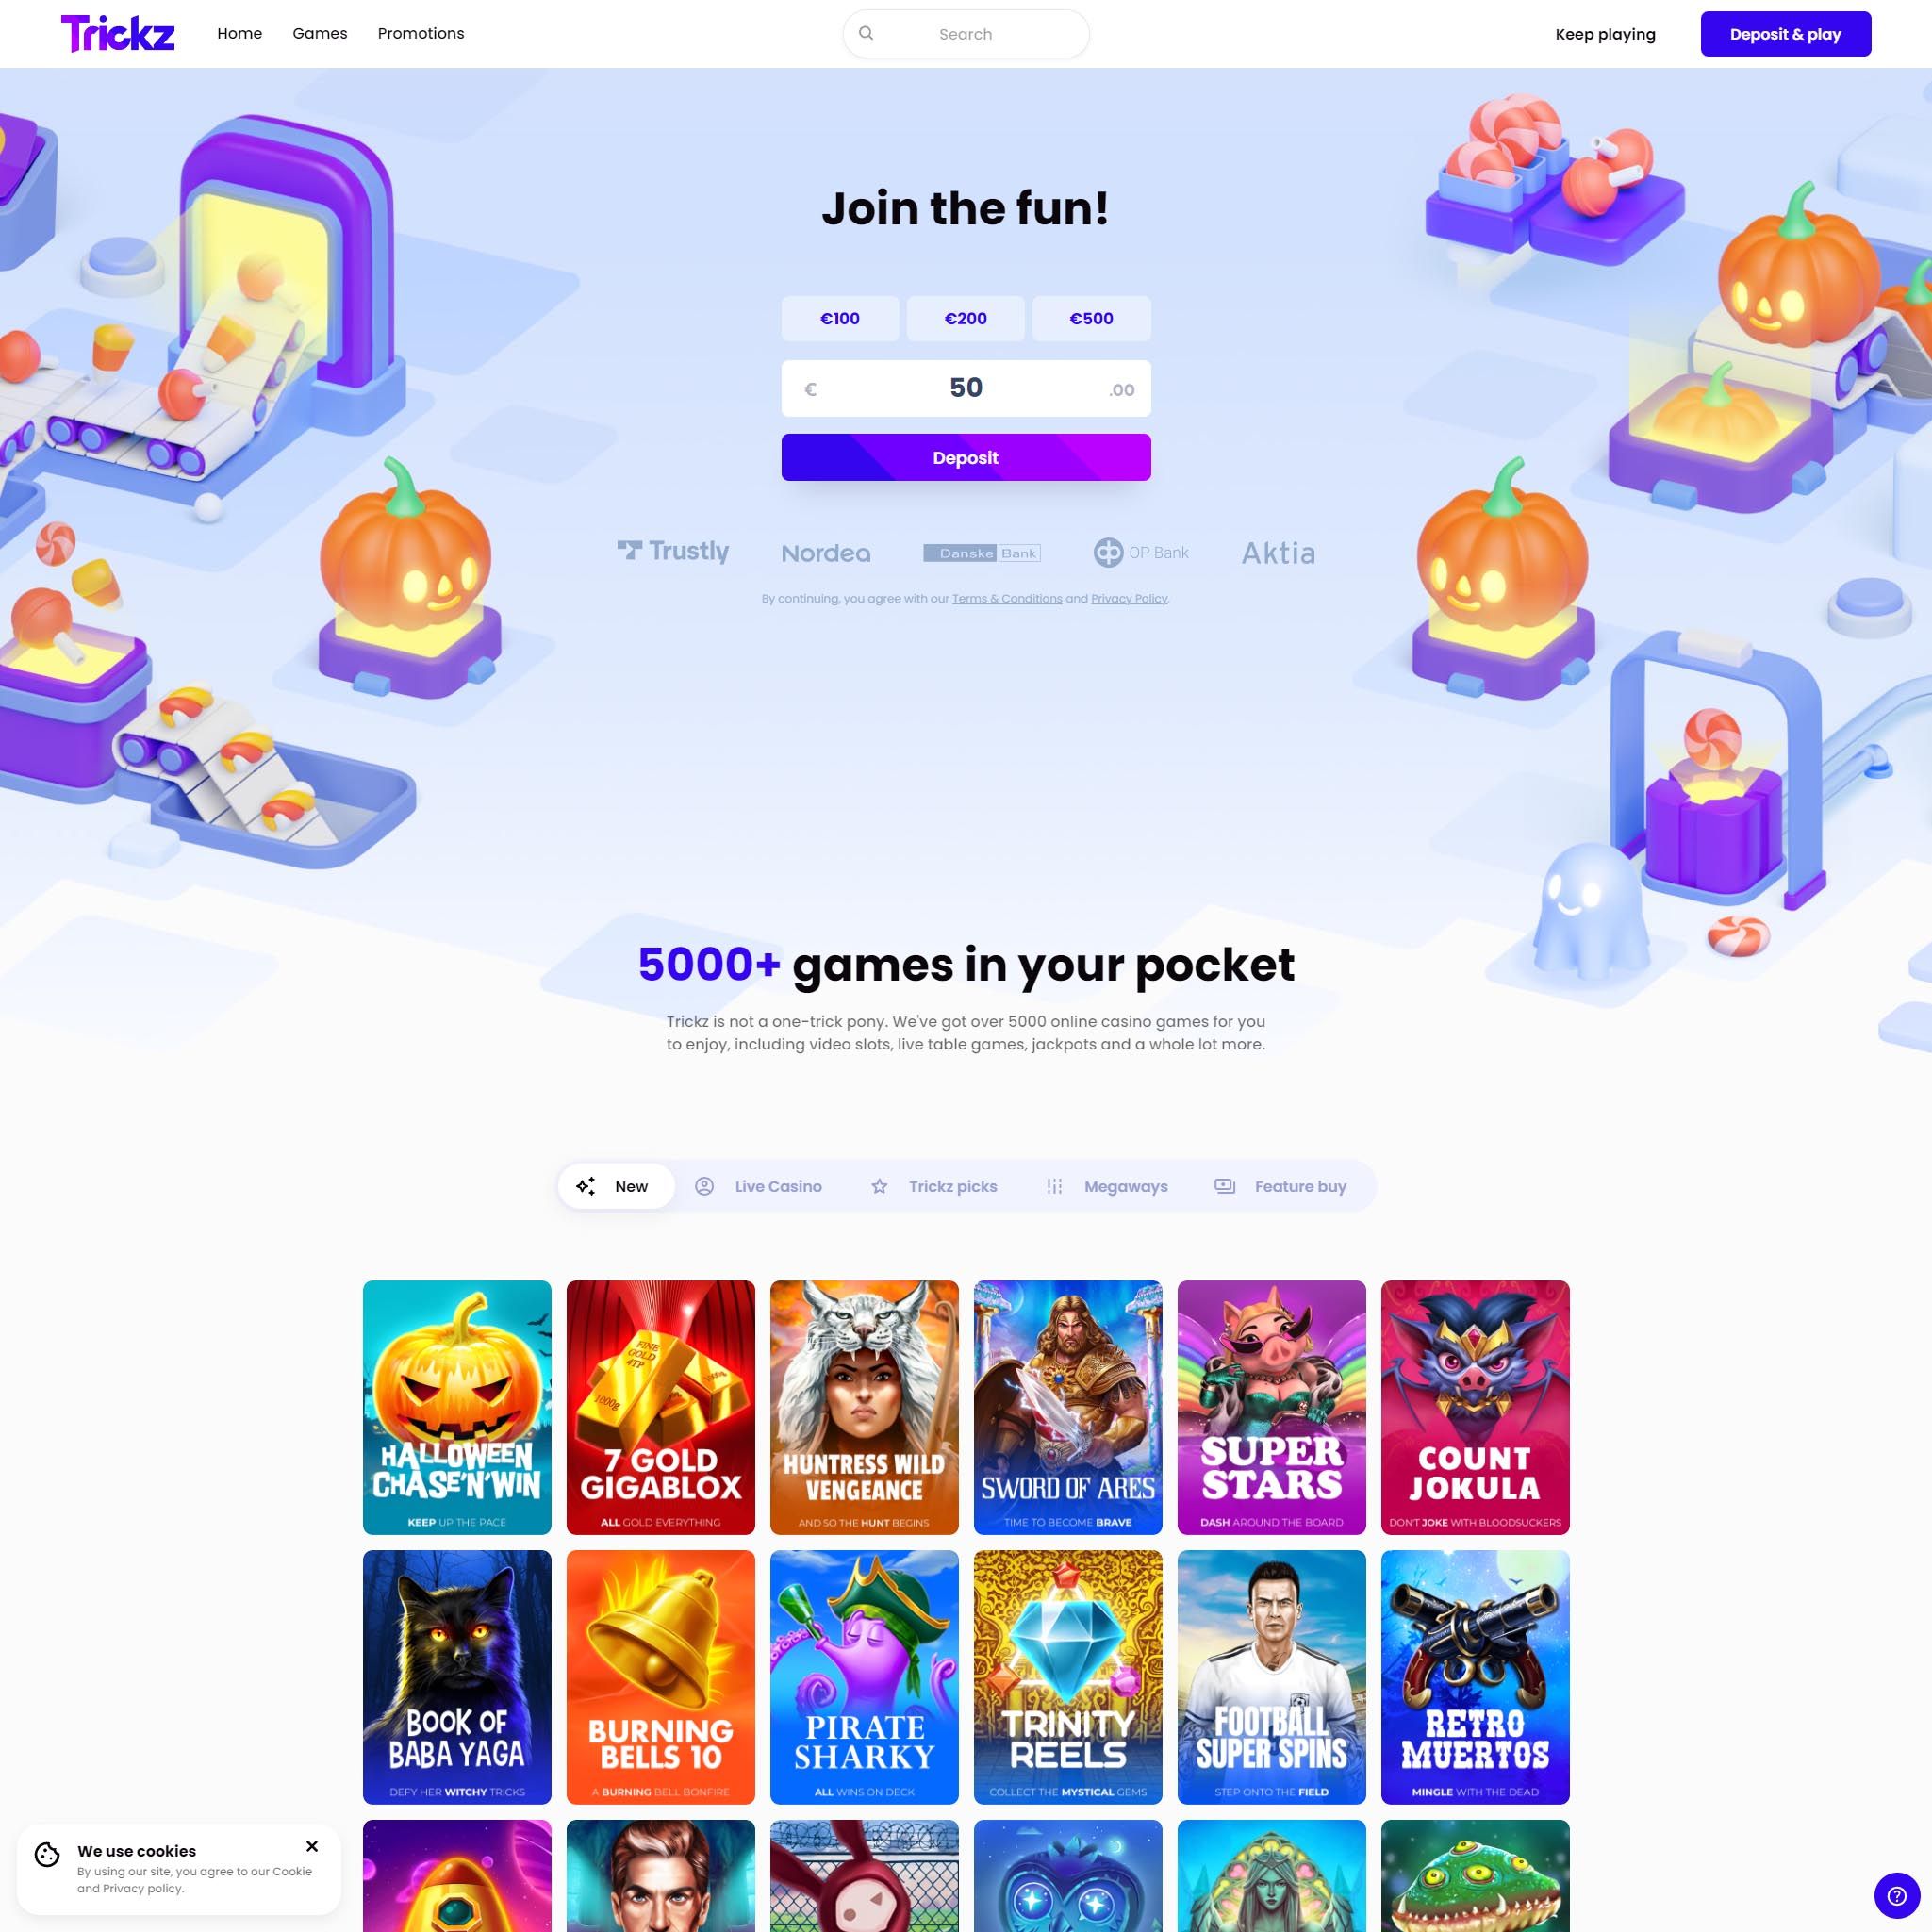 Trickz Casino review by Mr. Gamble